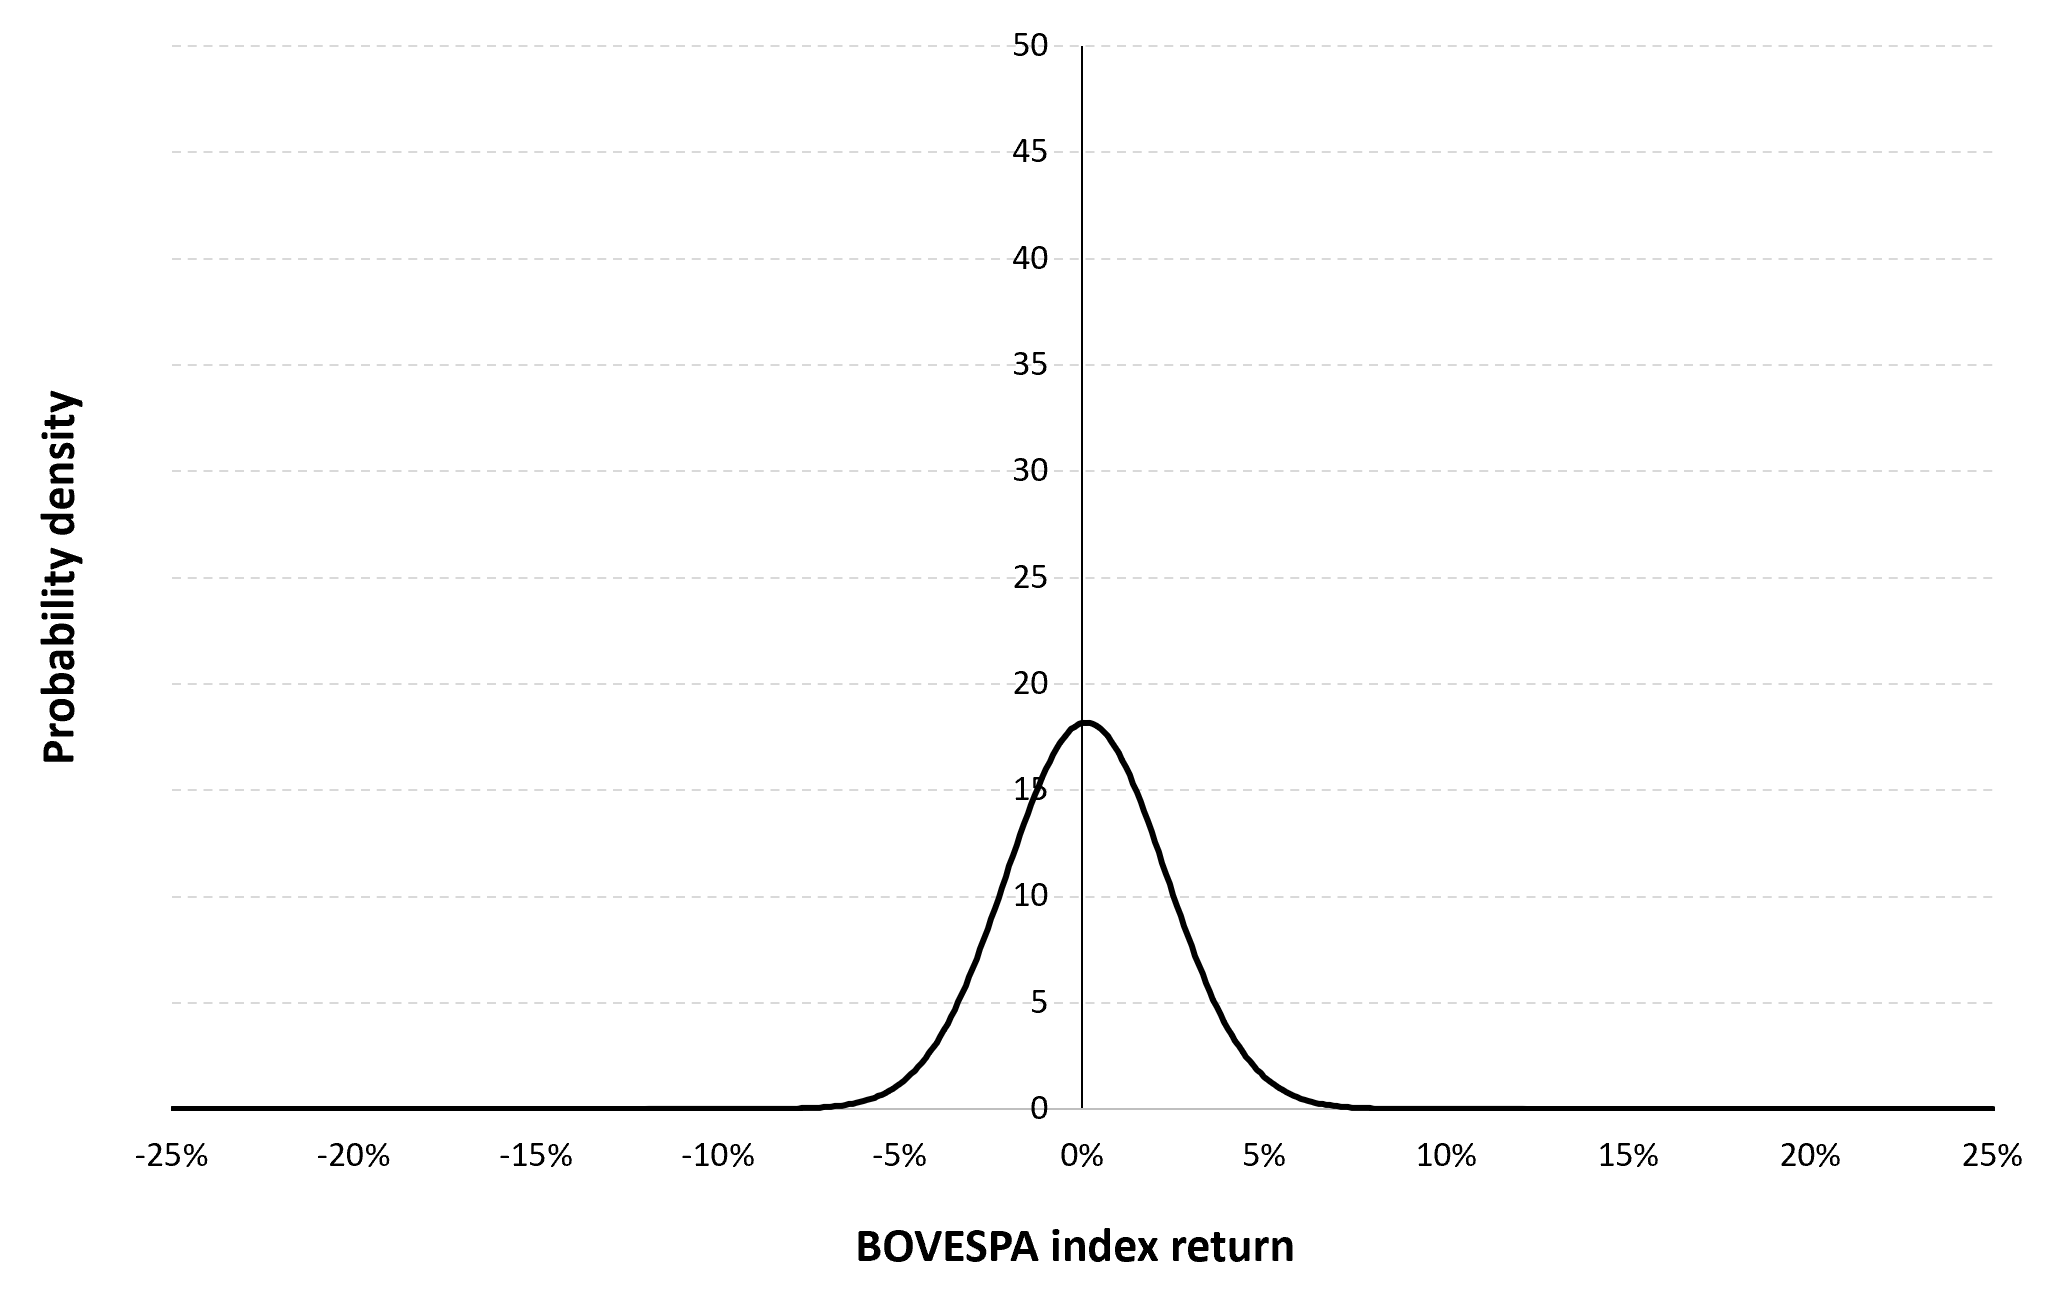 Gaussian distribution of the daily BOVESPA index returns